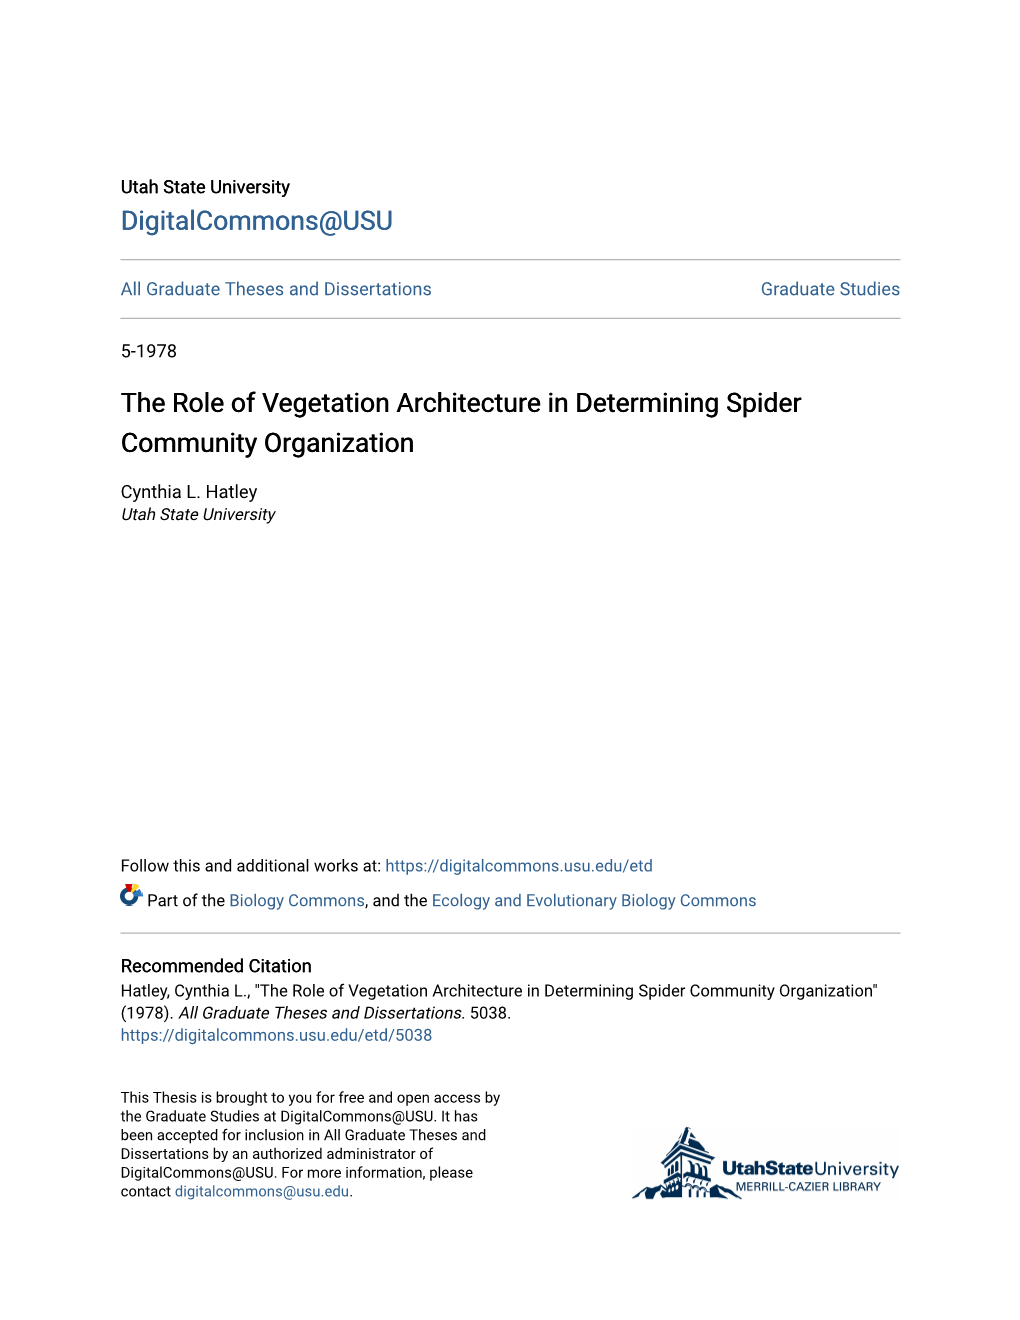 The Role of Vegetation Architecture in Determining Spider Community Organization